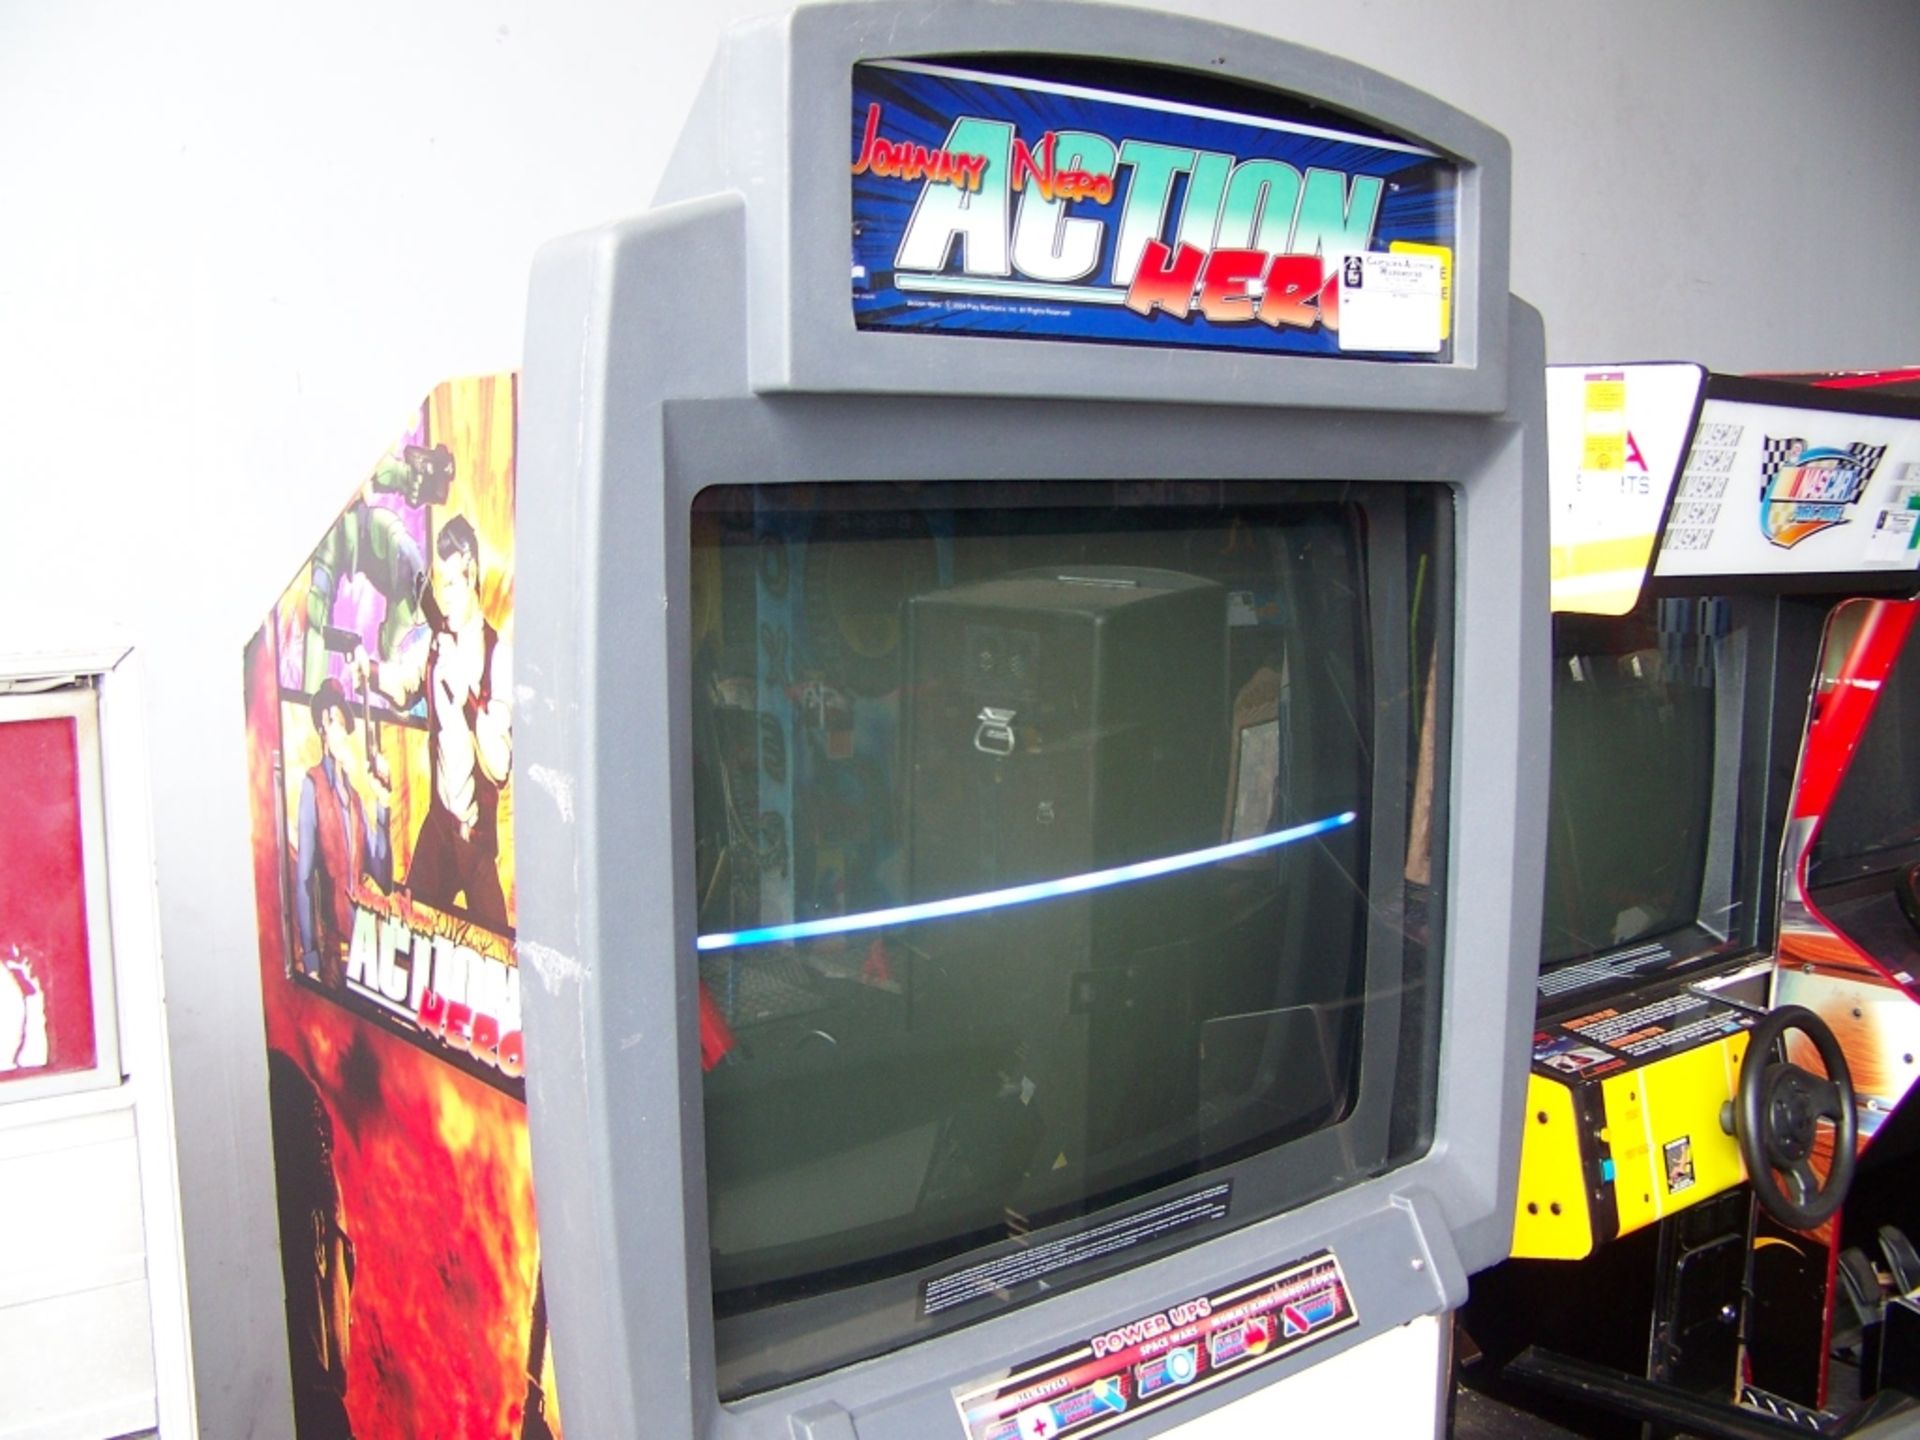 JOHNNY NERO ACTION HERO SHOWCASE 39"" ARCADE GAME Item is in used condition. Evidence of wear and - Image 2 of 3